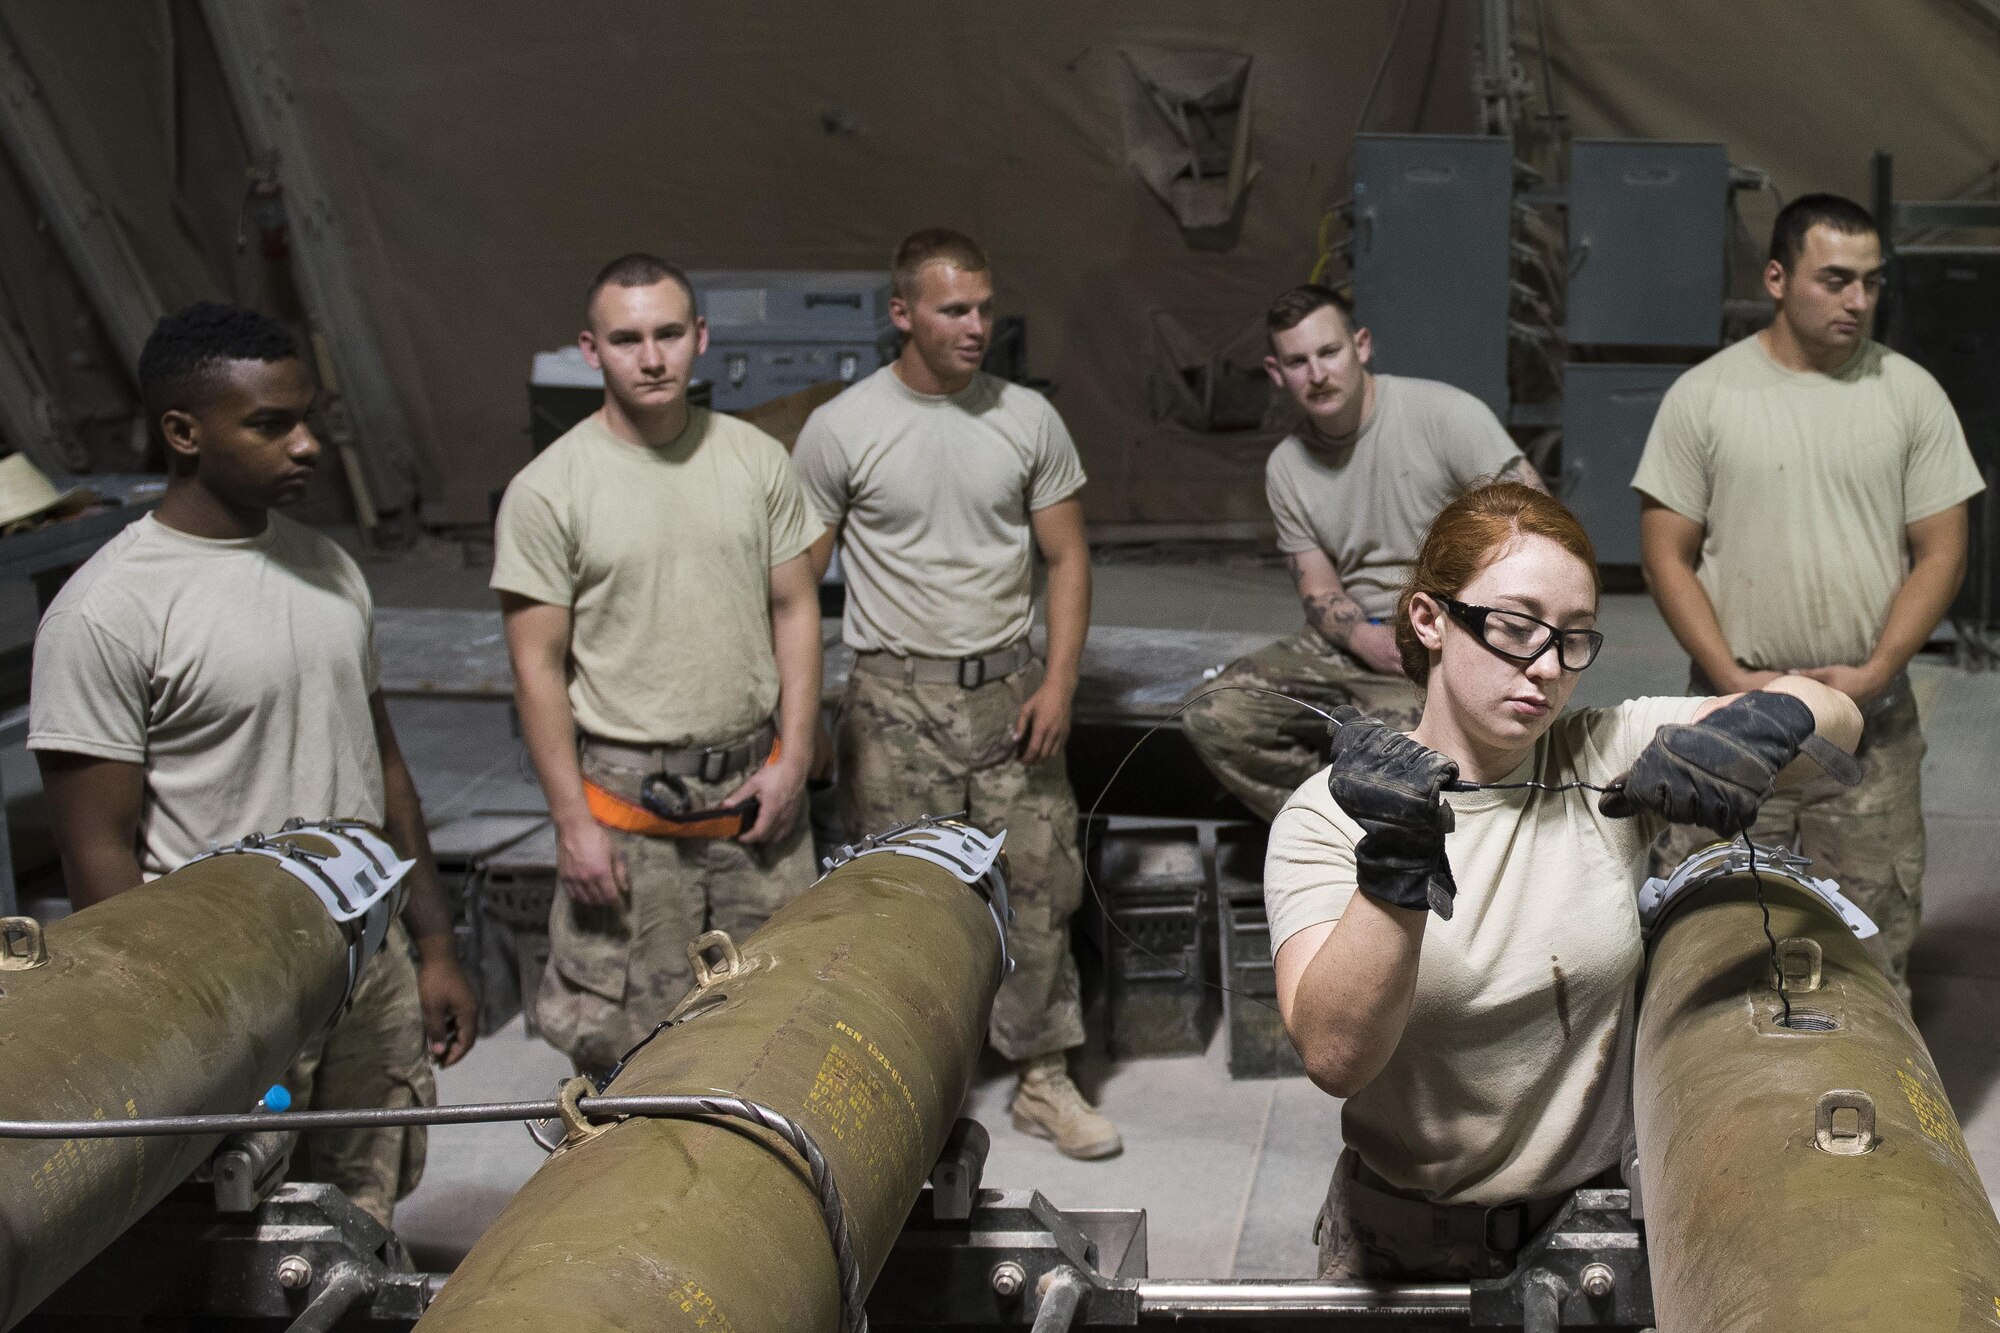 Senior Airman Briana Cannon, 332nd Expeditionary Maintenance Squadron munitions stockpile management crewmember, prepares the fuse for a GBU-38, July 12, 2017, in Southwest Asia. The squadron builds and maintains a variety of munitions to arm F-15E Strike Eagles and MQ-9 Reapers in support of Operation Inherent Resolve. (U.S. Air Force photo/Senior Airman Damon Kasberg)